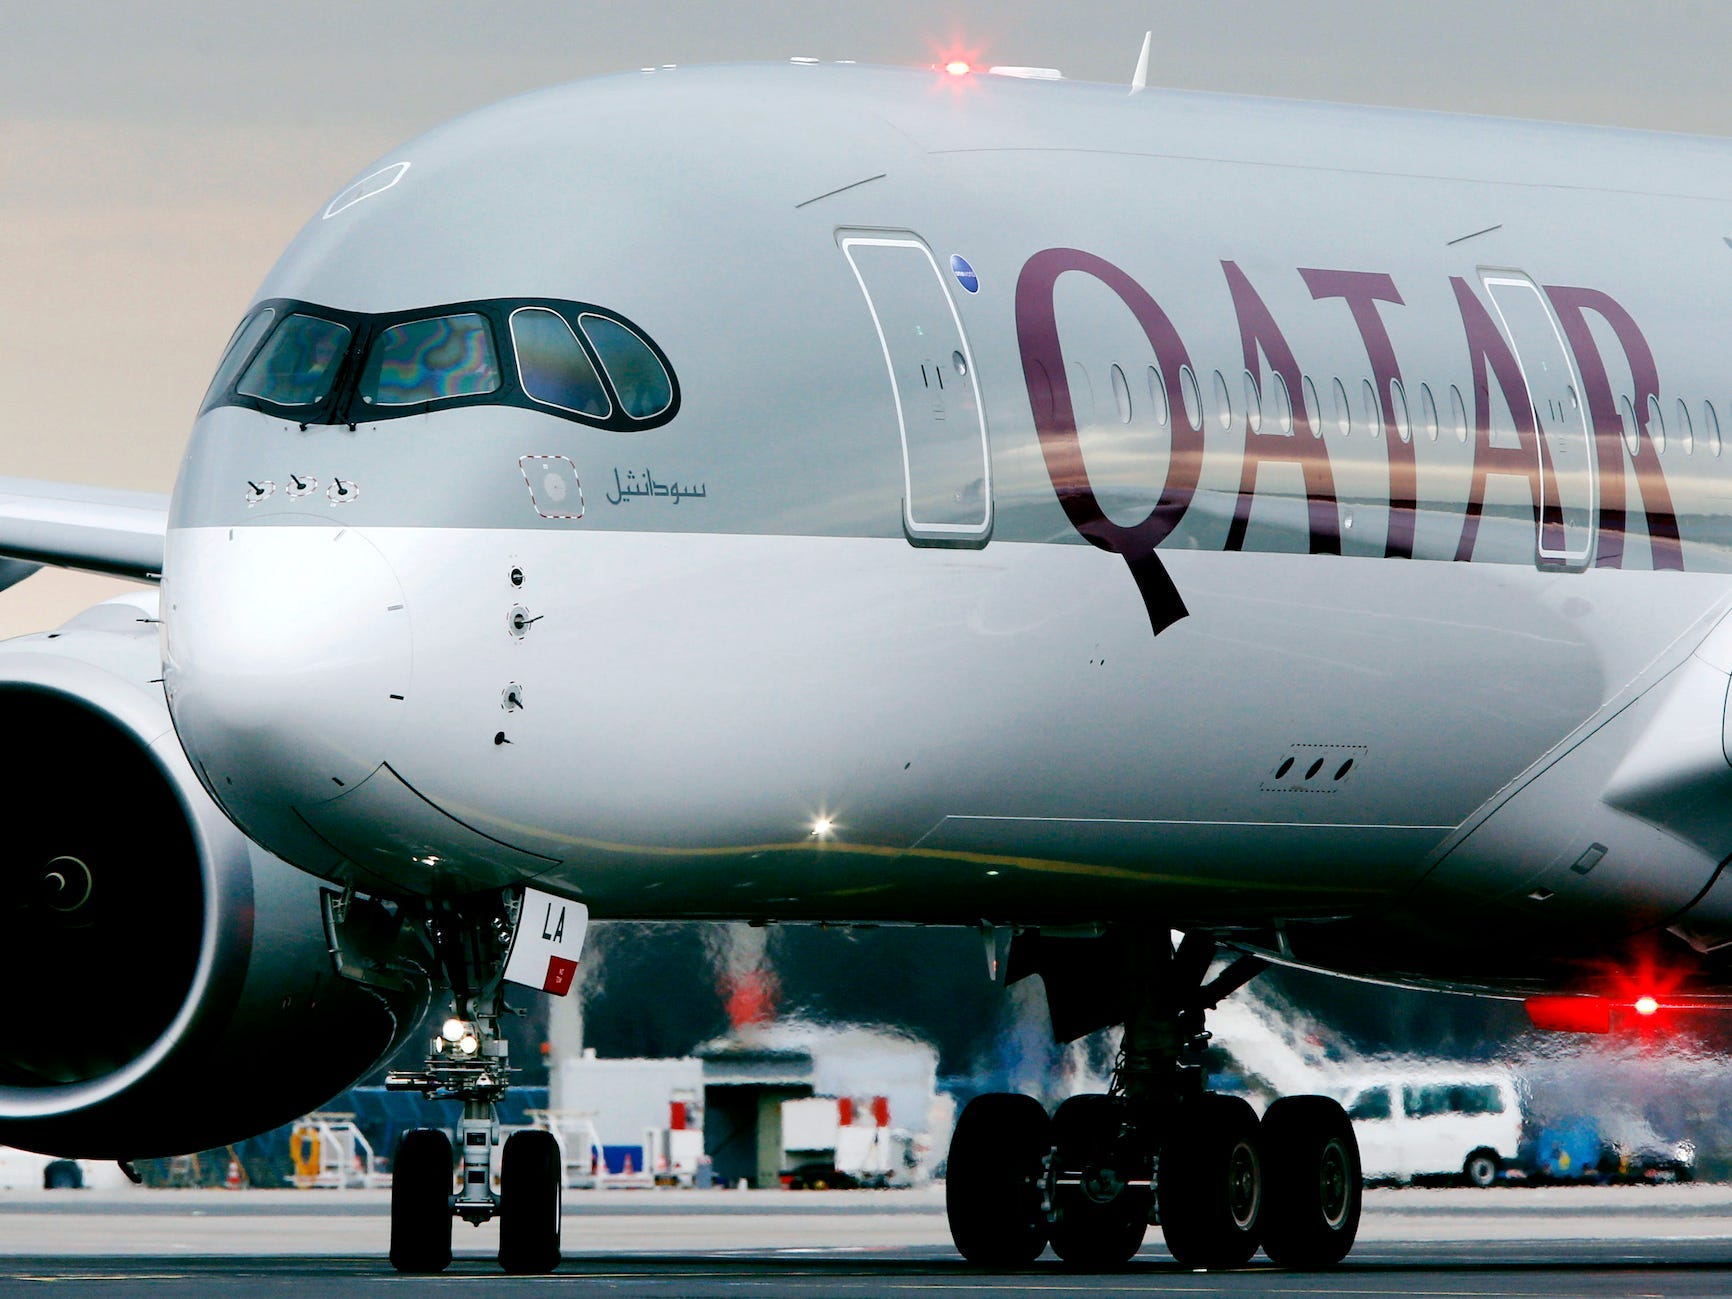 The front of a Qatar Airways plane.